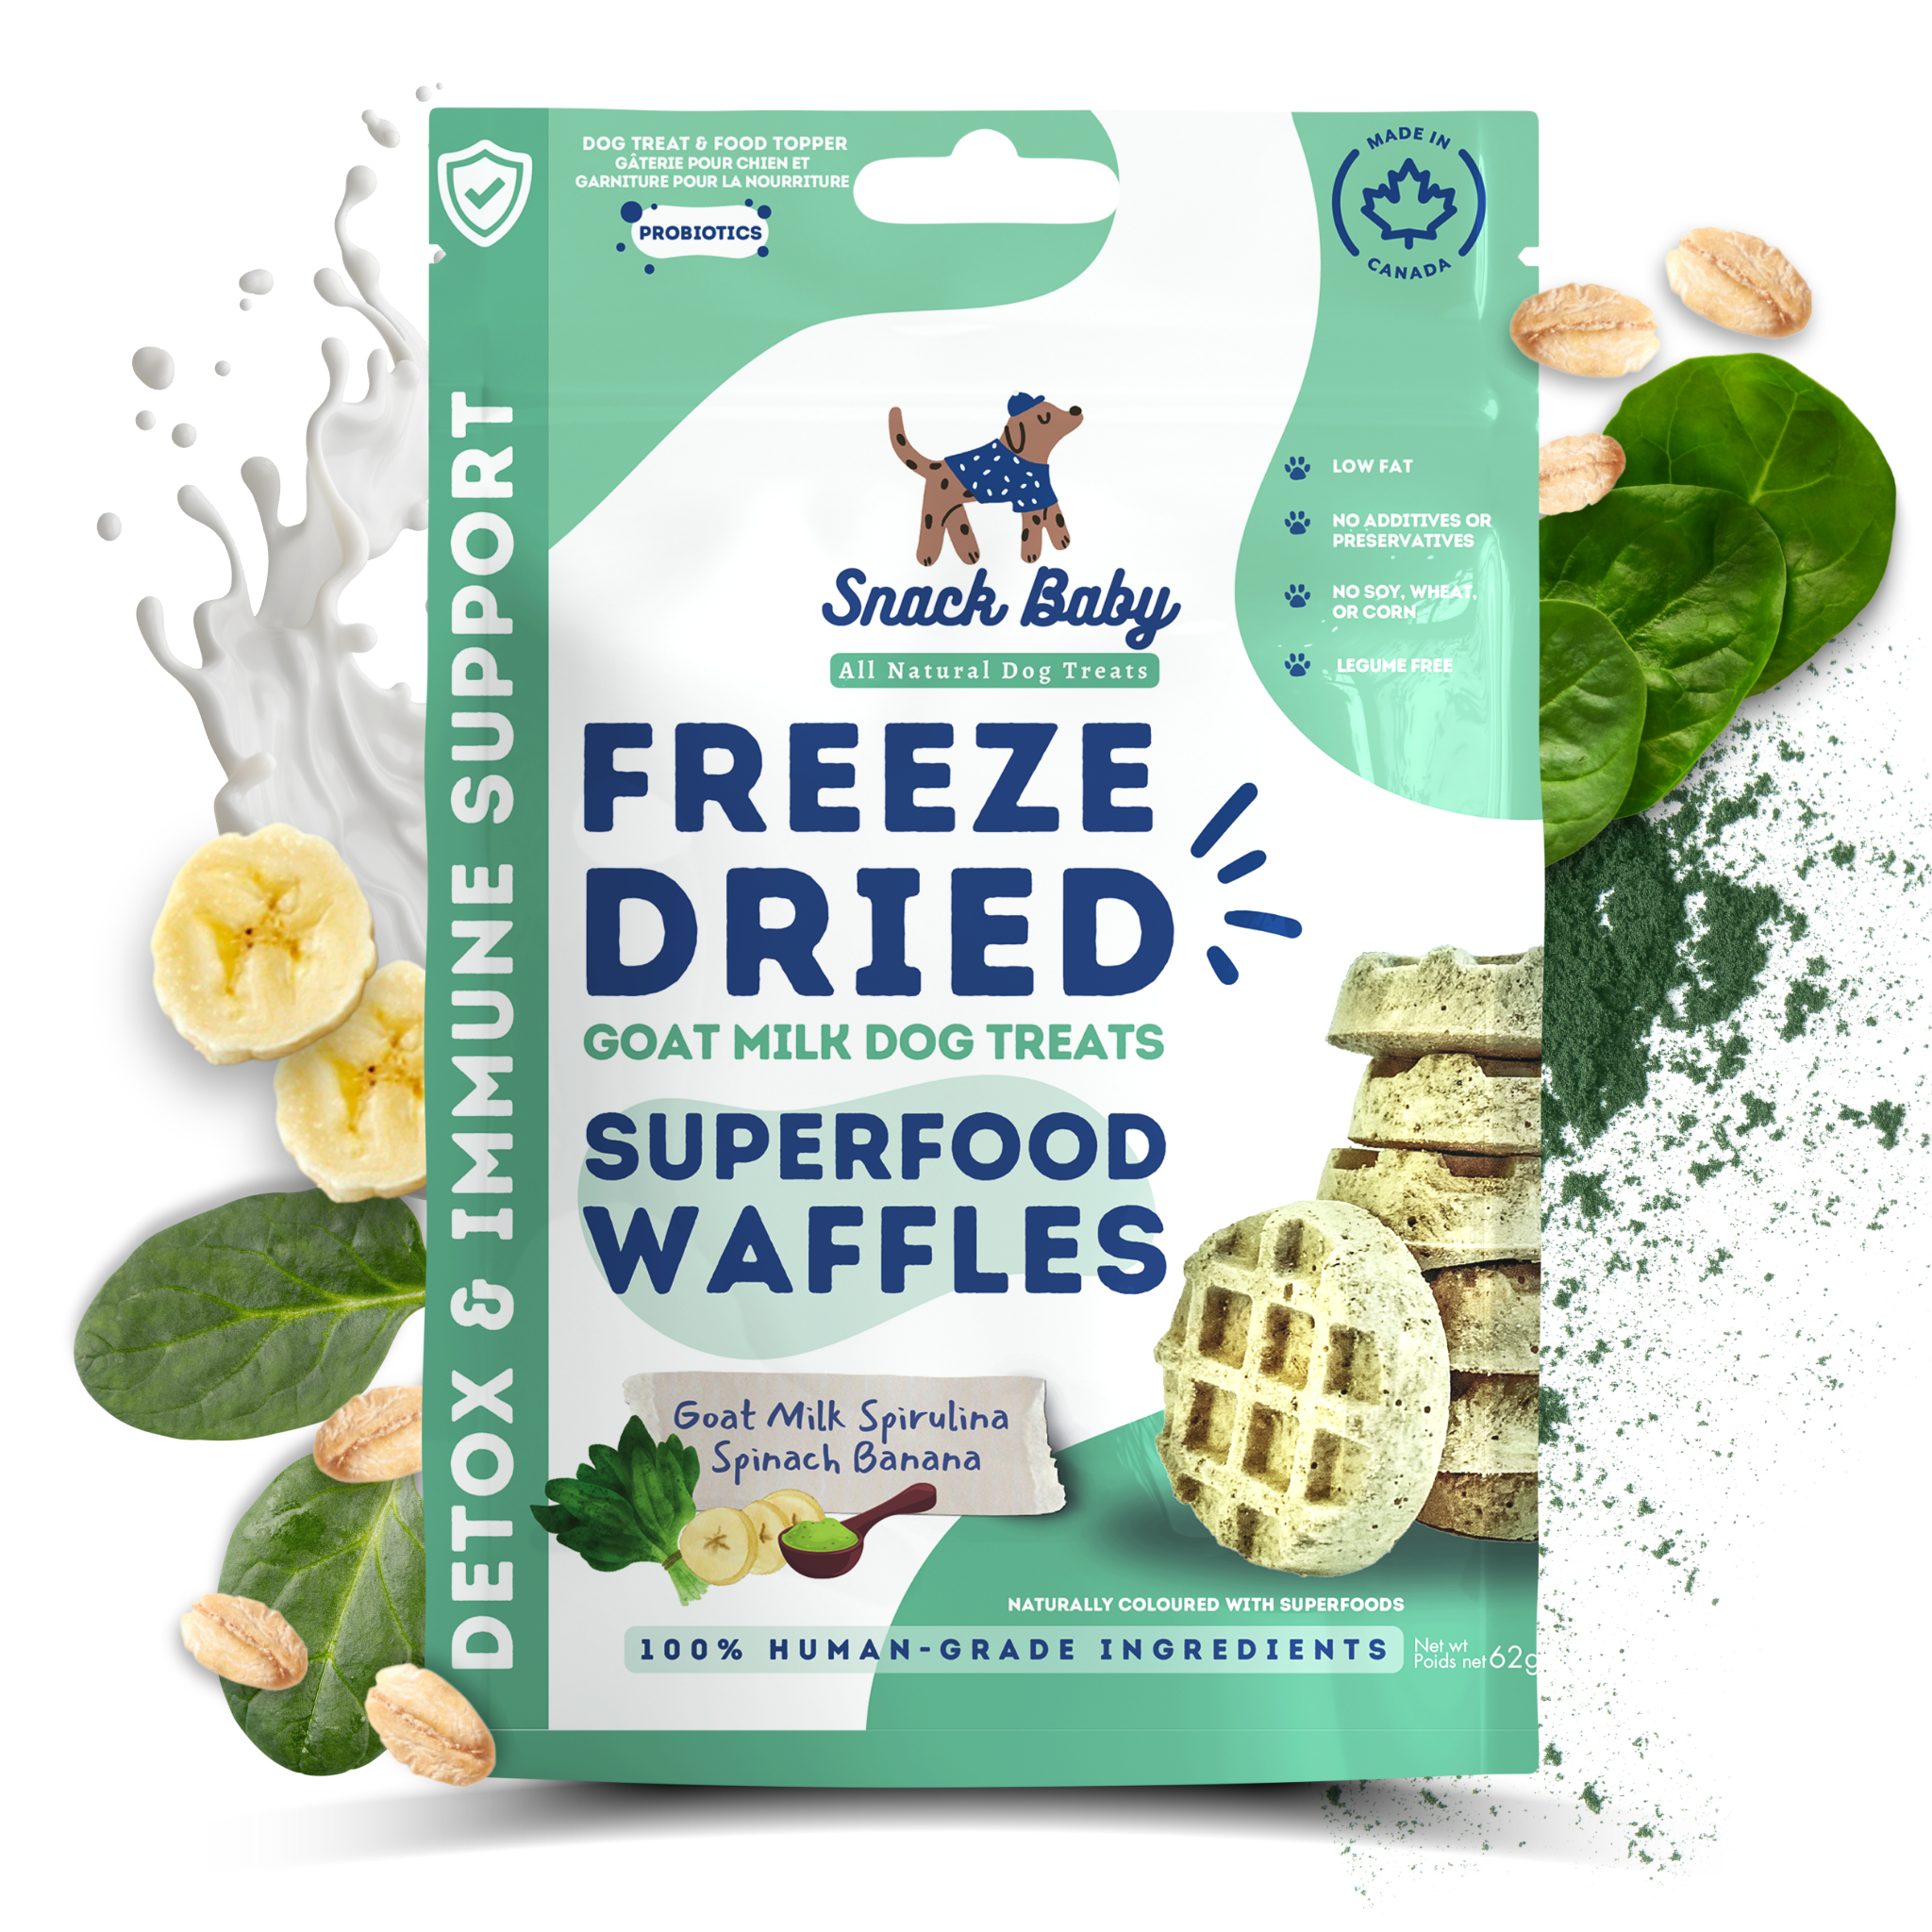 Snack Baby's Superfood Waffles with Spirulina and Spinach all natural dog treats